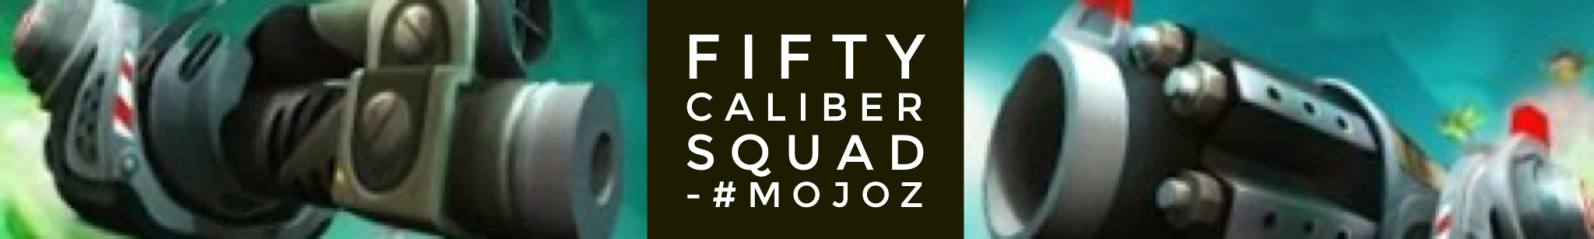 Fifty cal squad banner.png